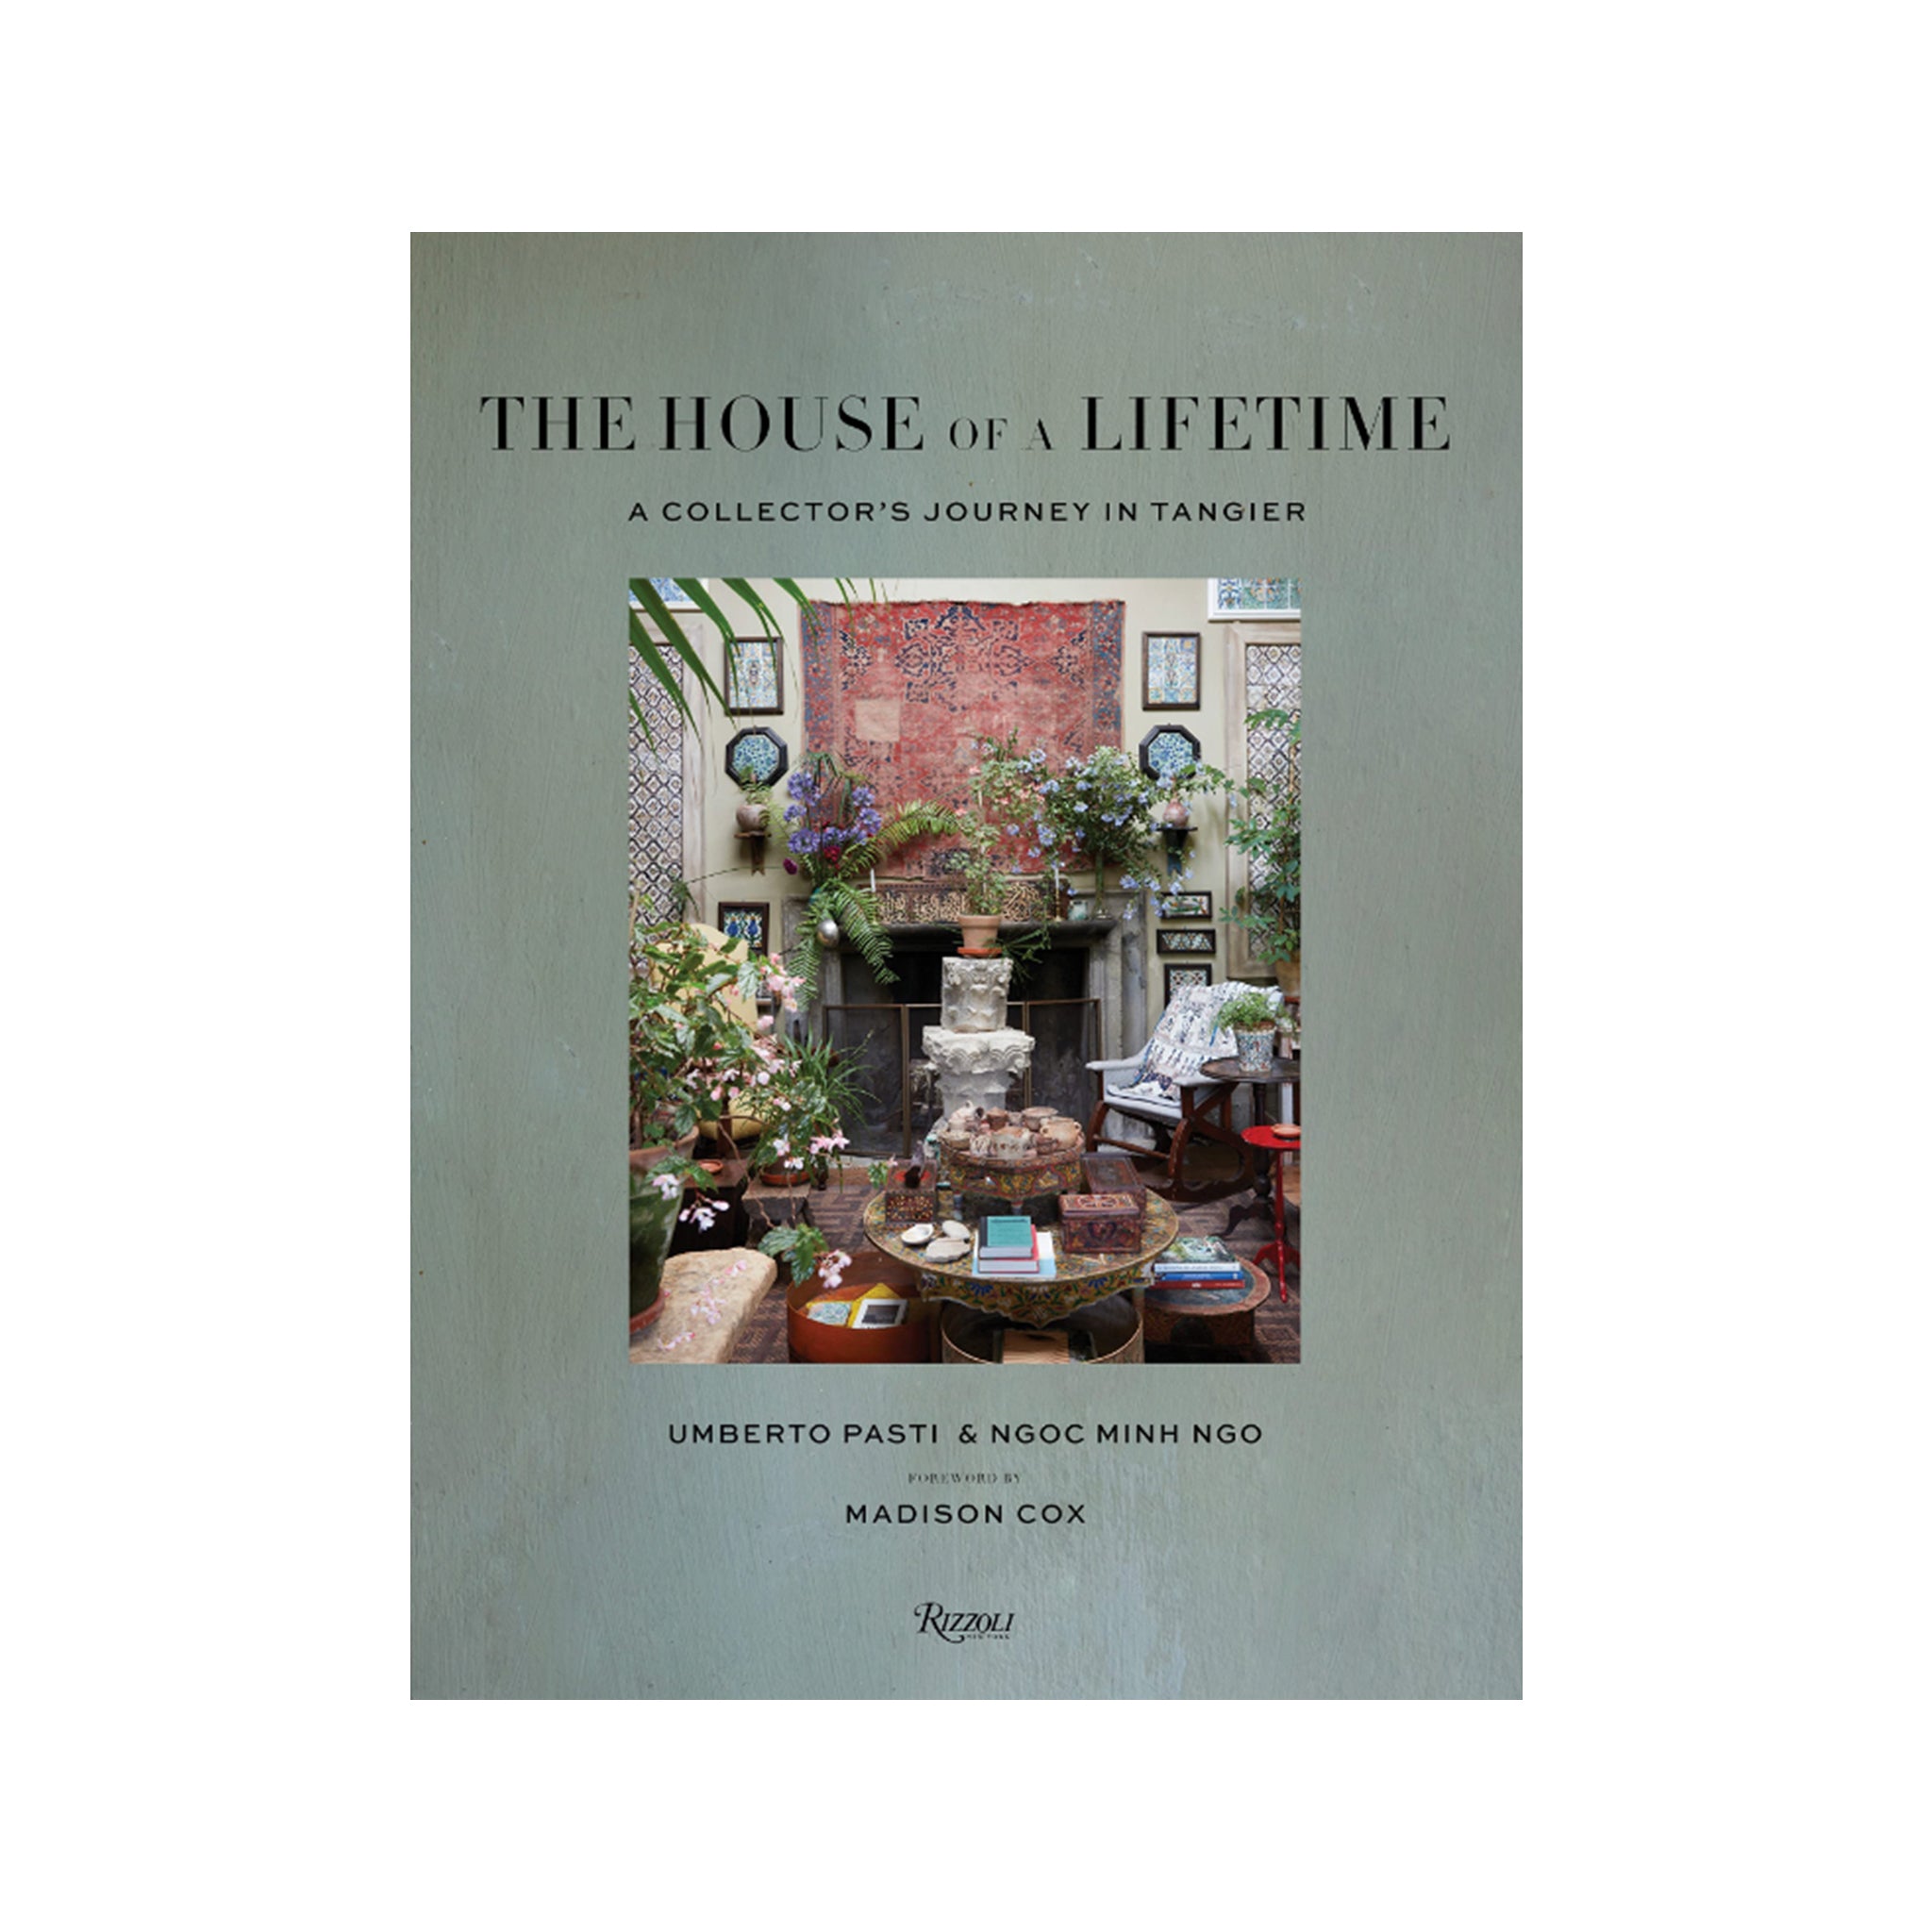 The House of A Lifetime: A Collector's Journey in Tangier